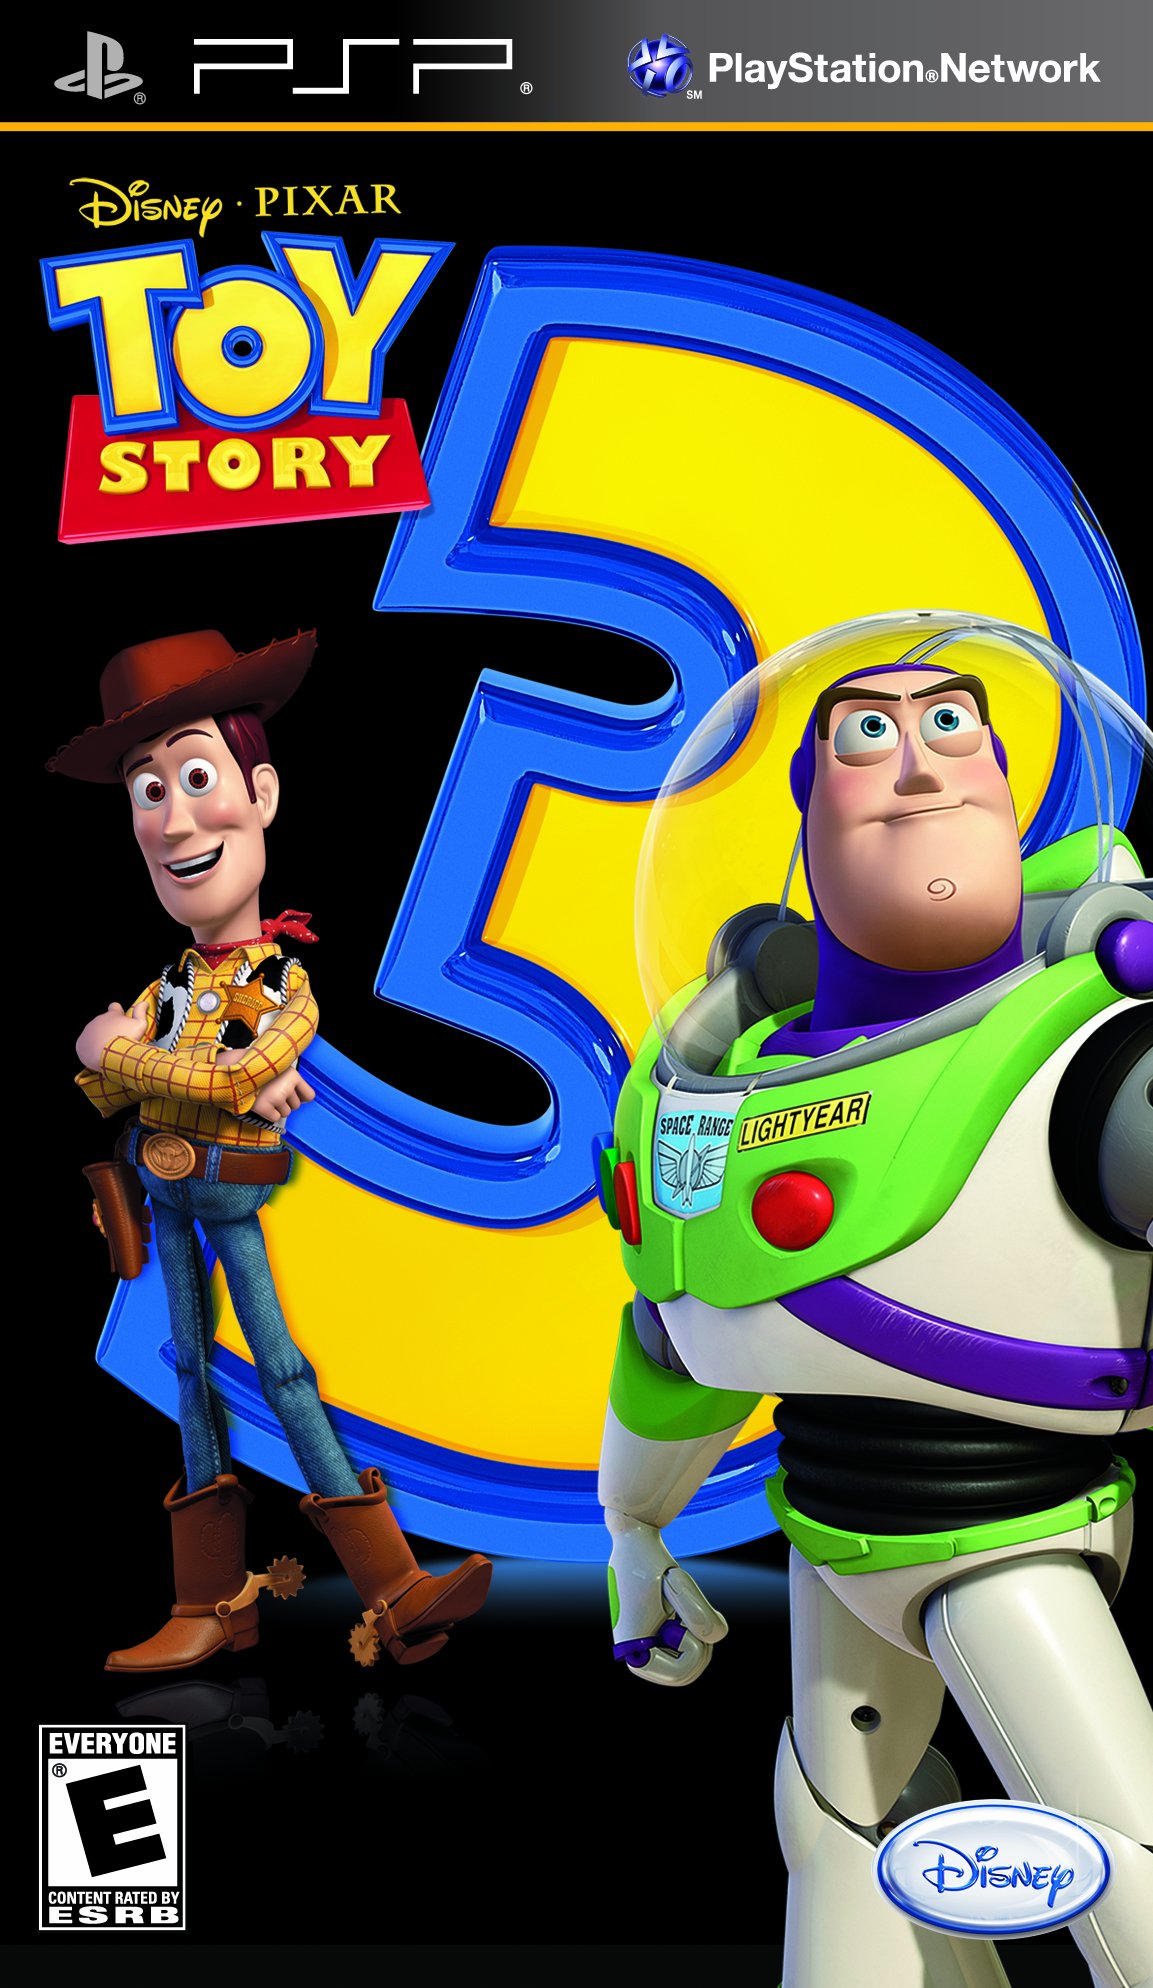 Toy Story 3 The Video Game Release Date (Xbox 360, PS3, PC ...